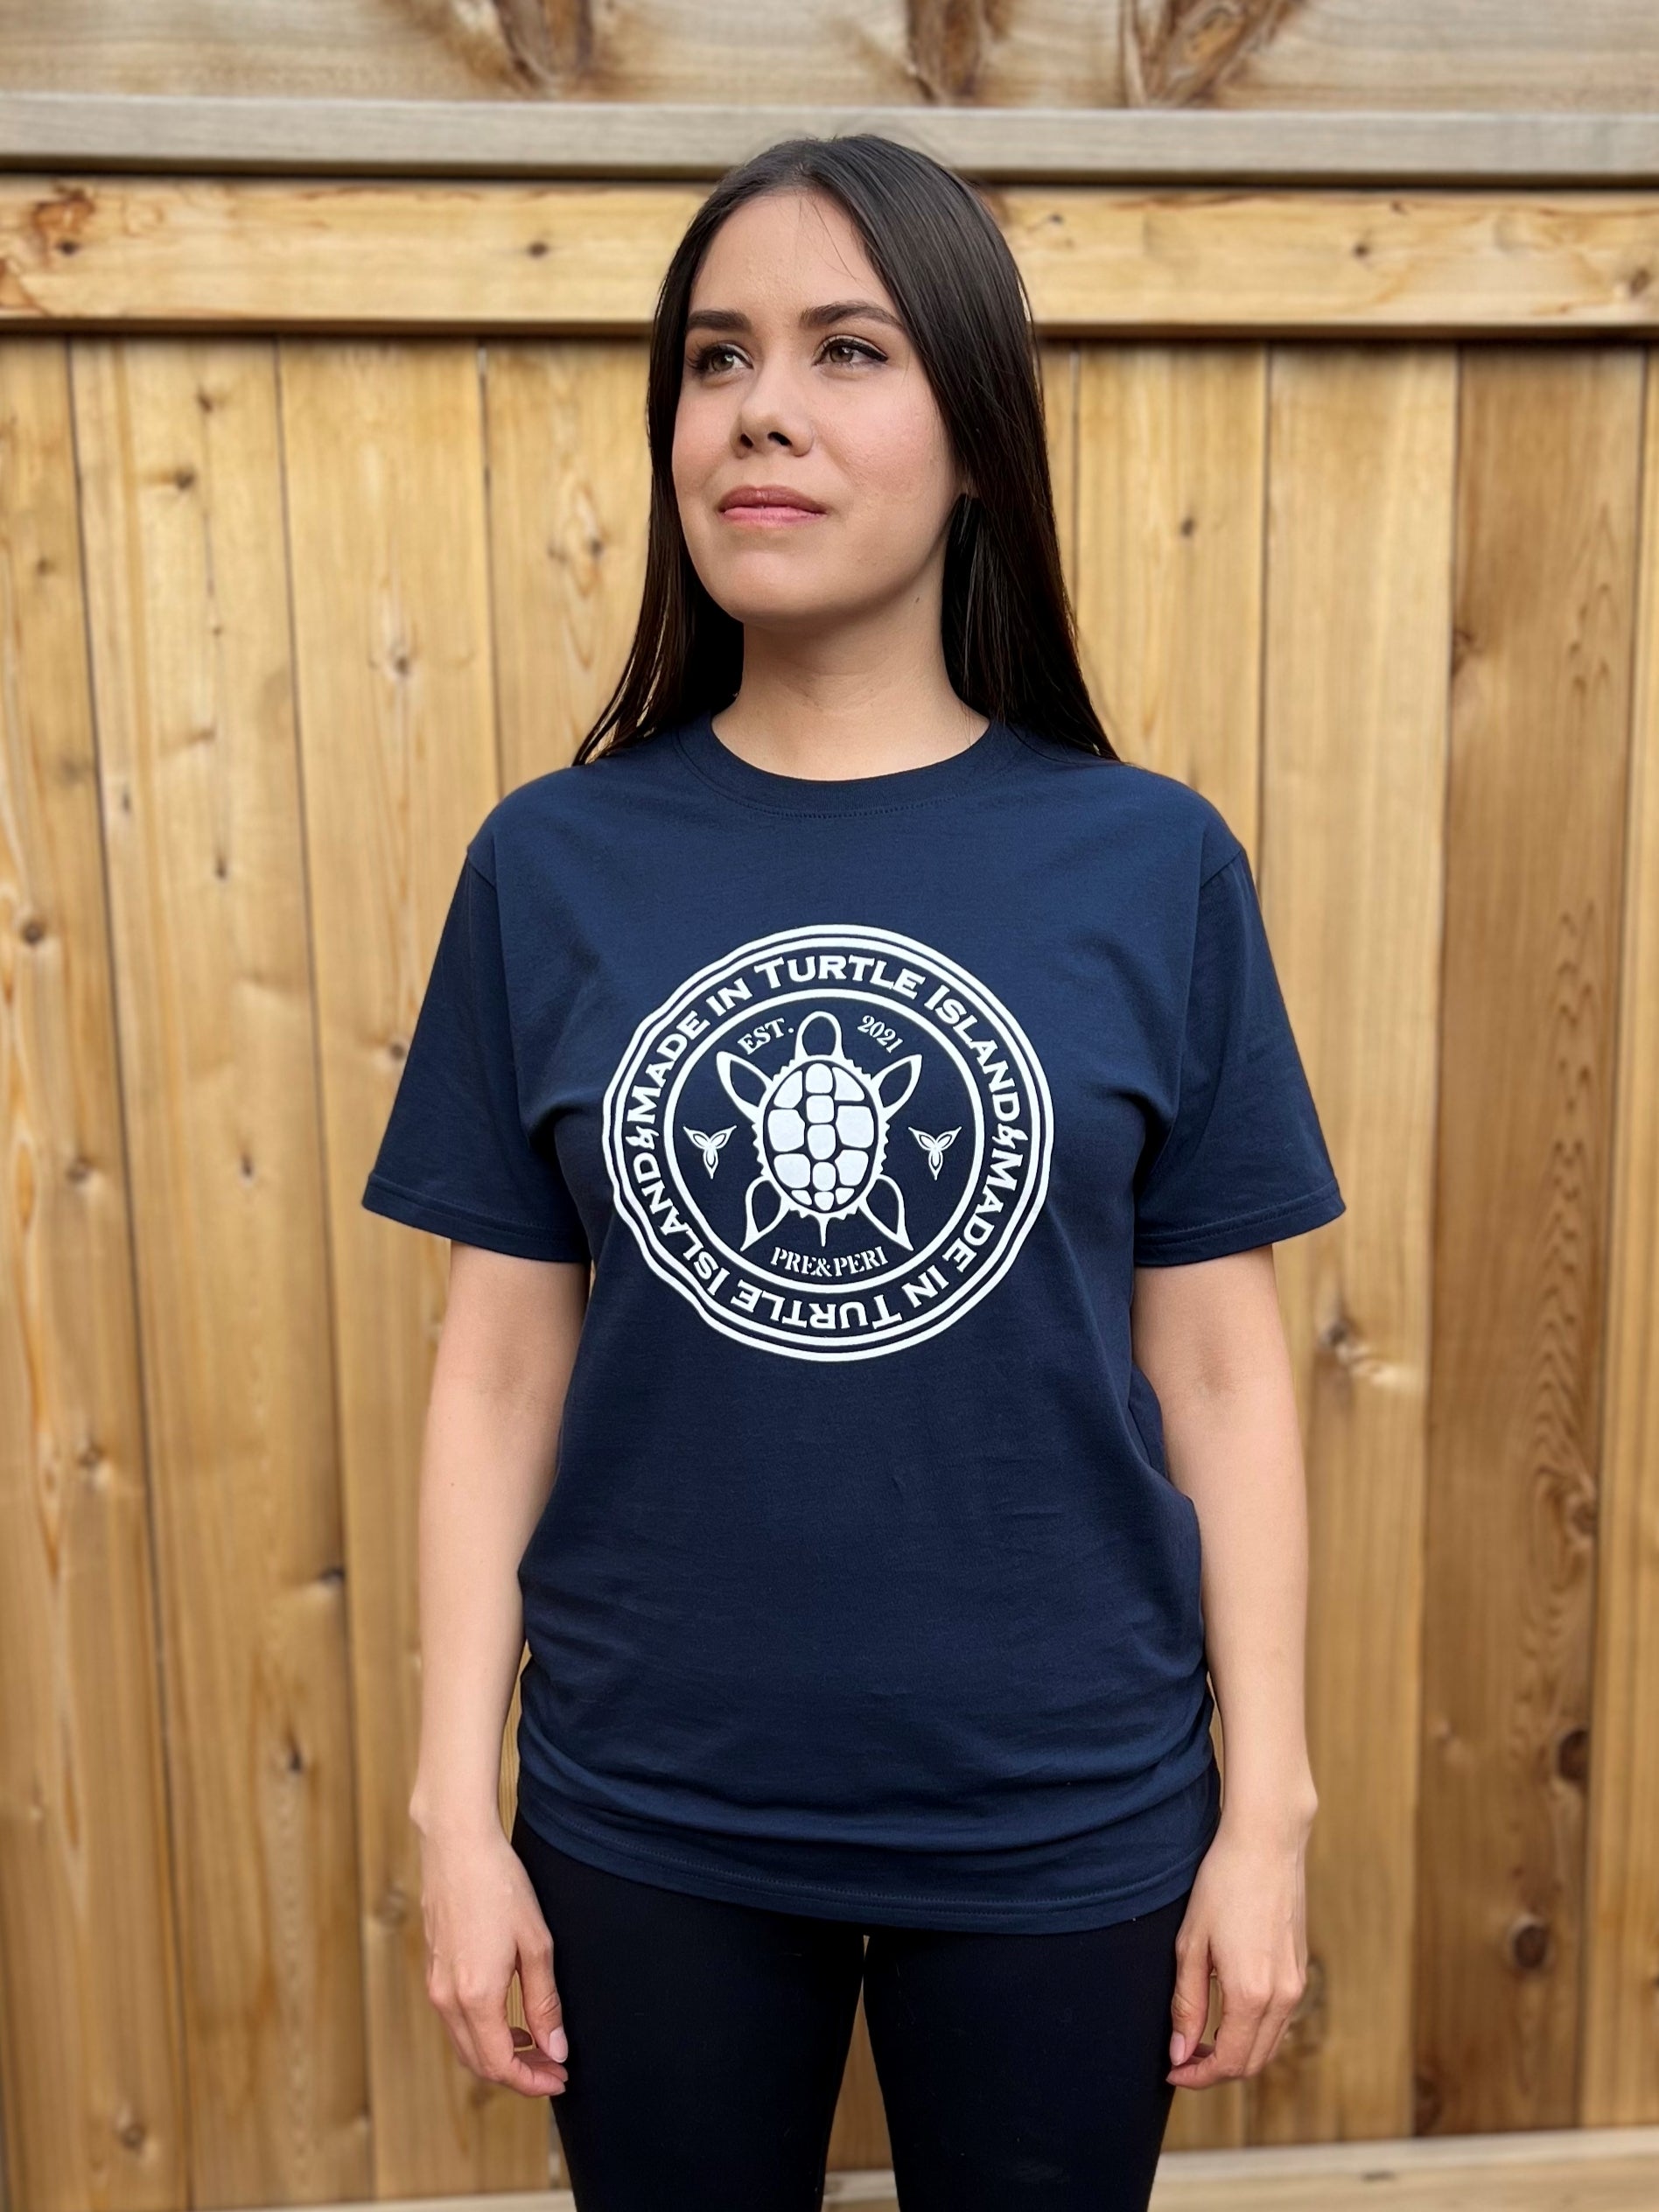 A woman wearing a navy unisex t-shirt with a white print of a Turtle flanked by trilliums and with the words "Made in Turtle Island" around it in a circle. 